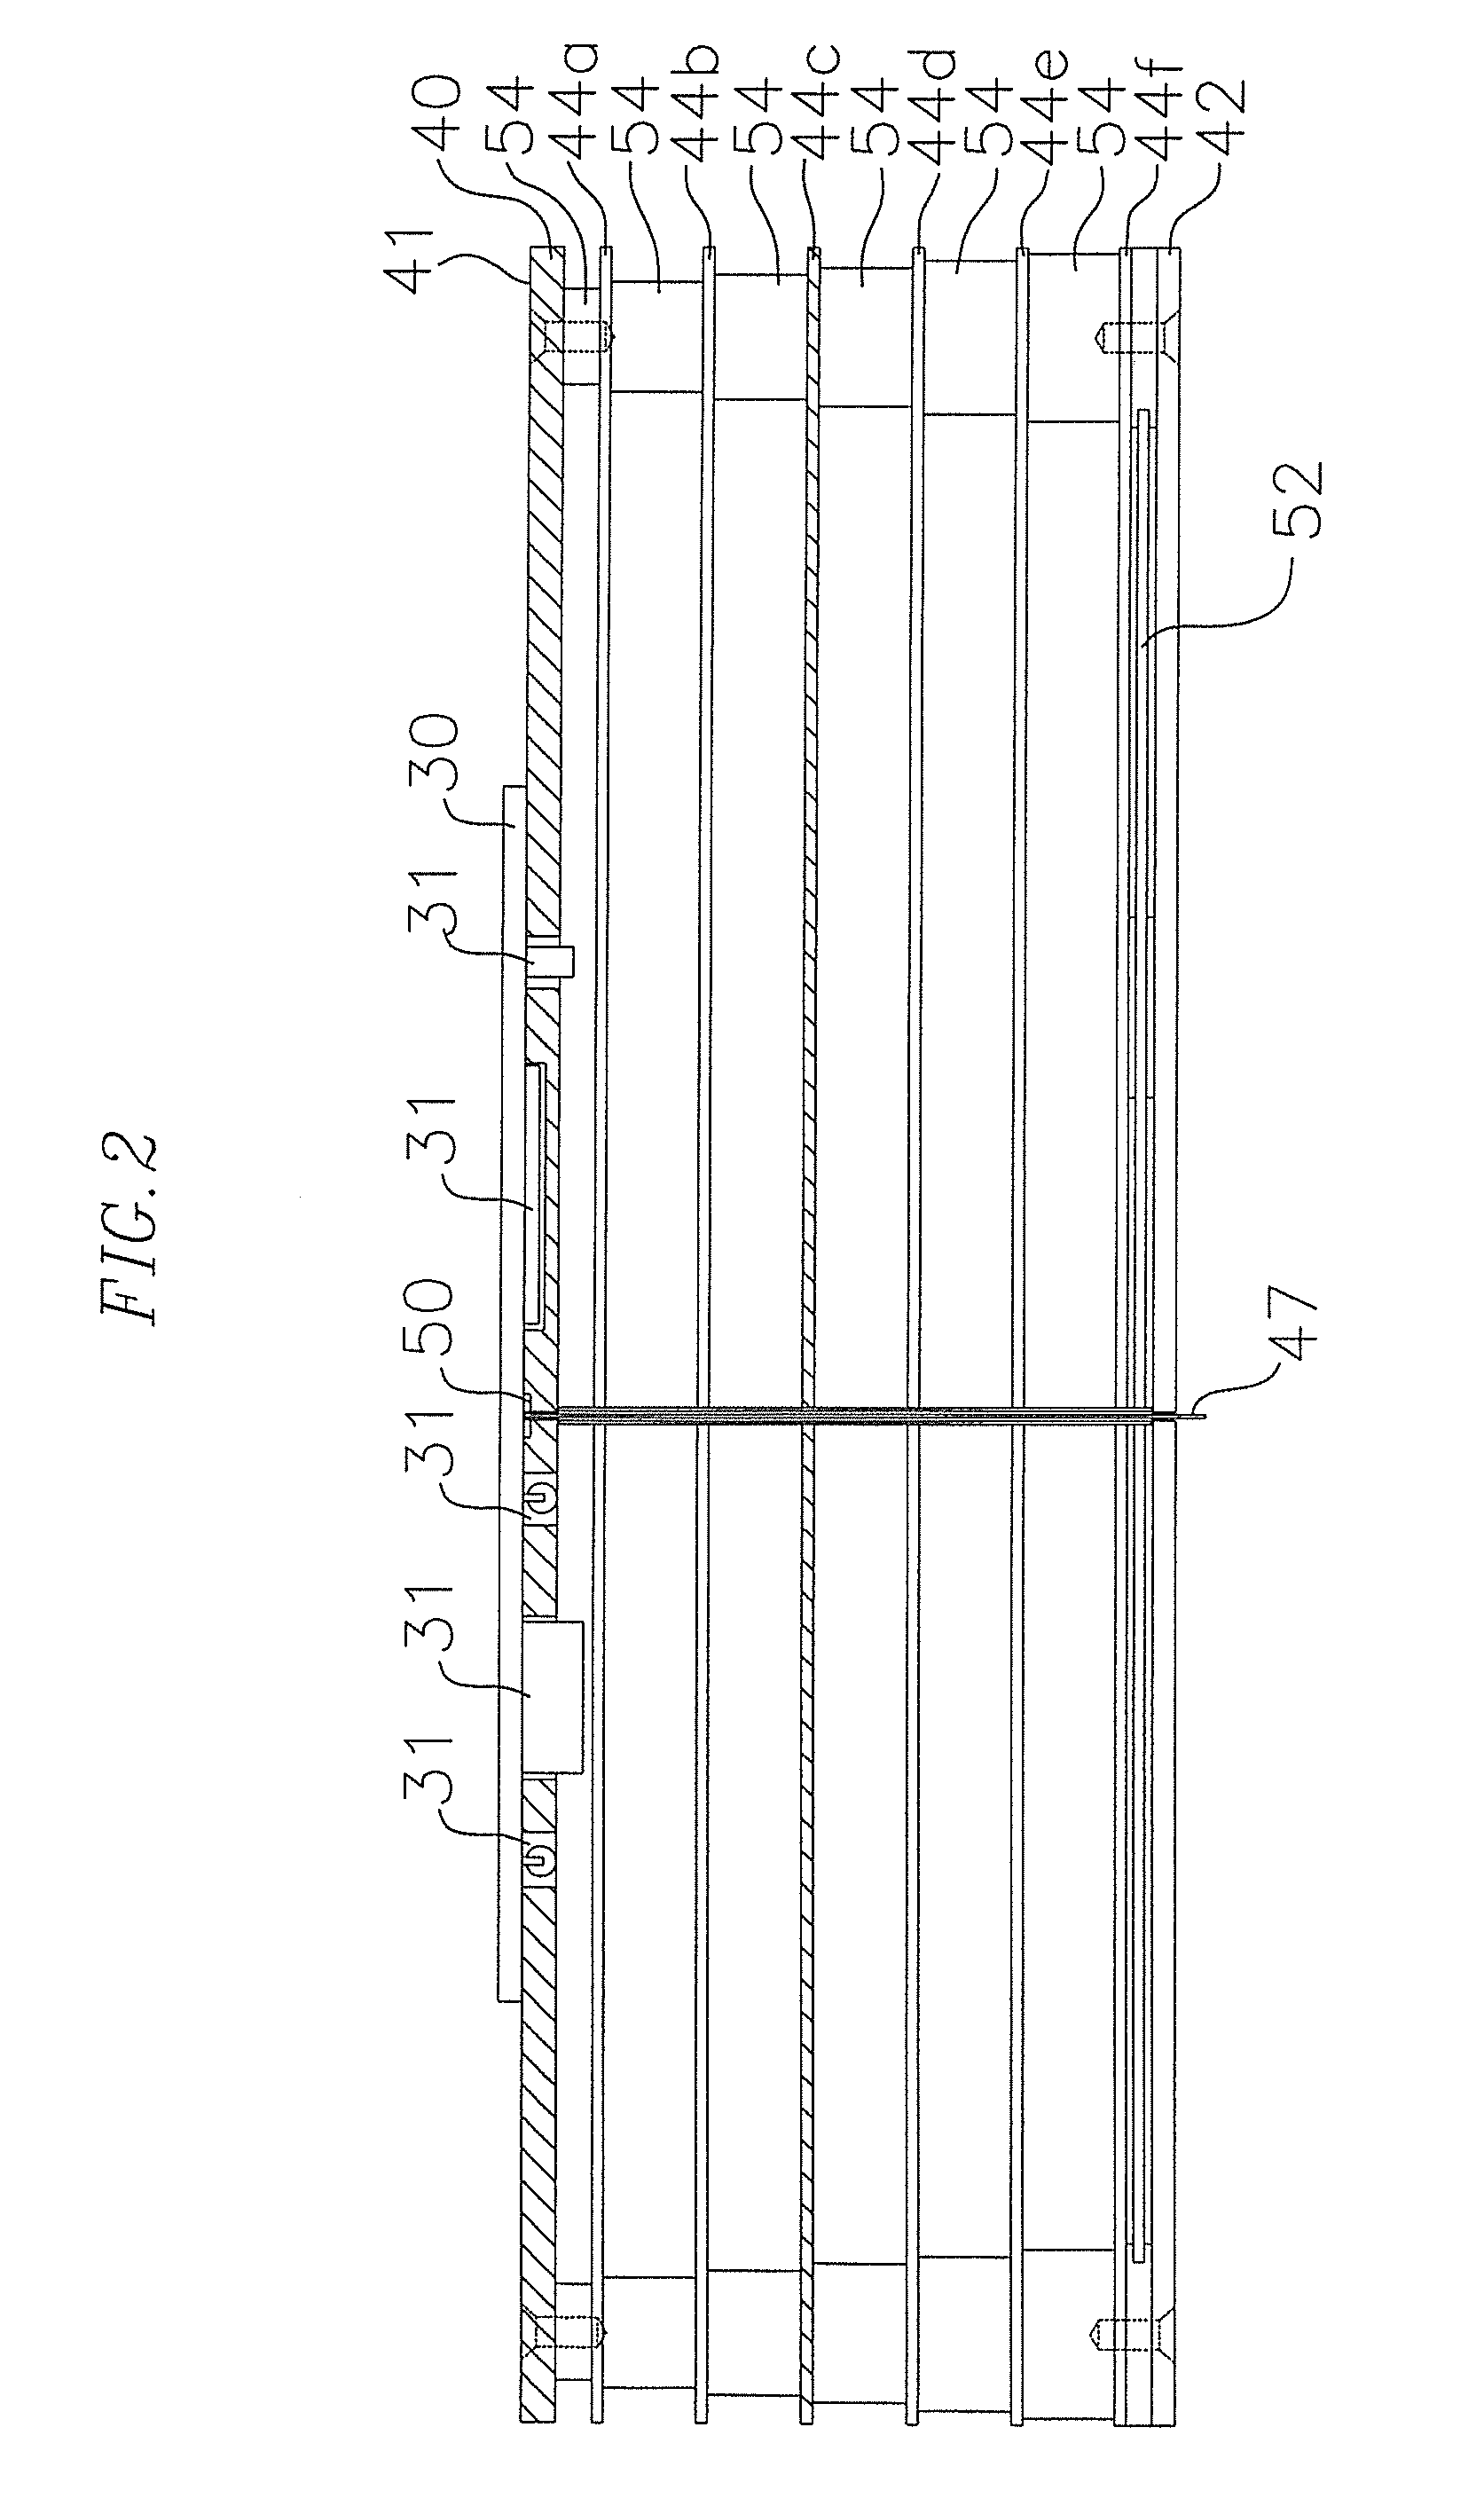 Loaded printed circuit board test fixture and method for manufacturing the same